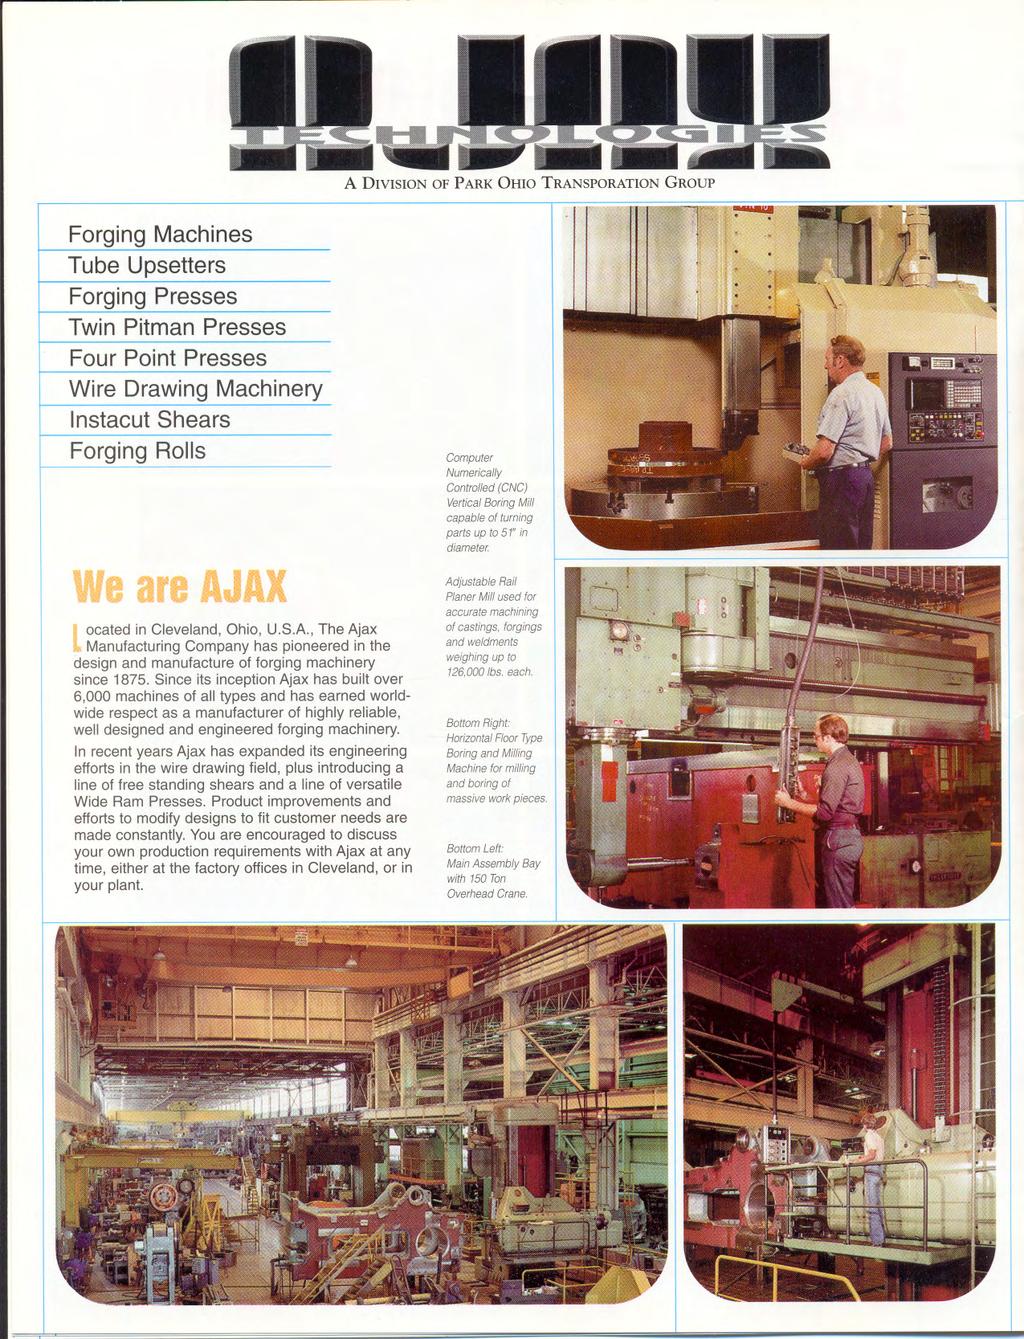 A DIVISION OF PARK OHIO TRANSPORATION GROUP Forging Machines Tube Upsetters Forging Presses Twin Pitman Presses Four Point Presses Wire Drawing Machinery Instacut Shears Forging Rolls.